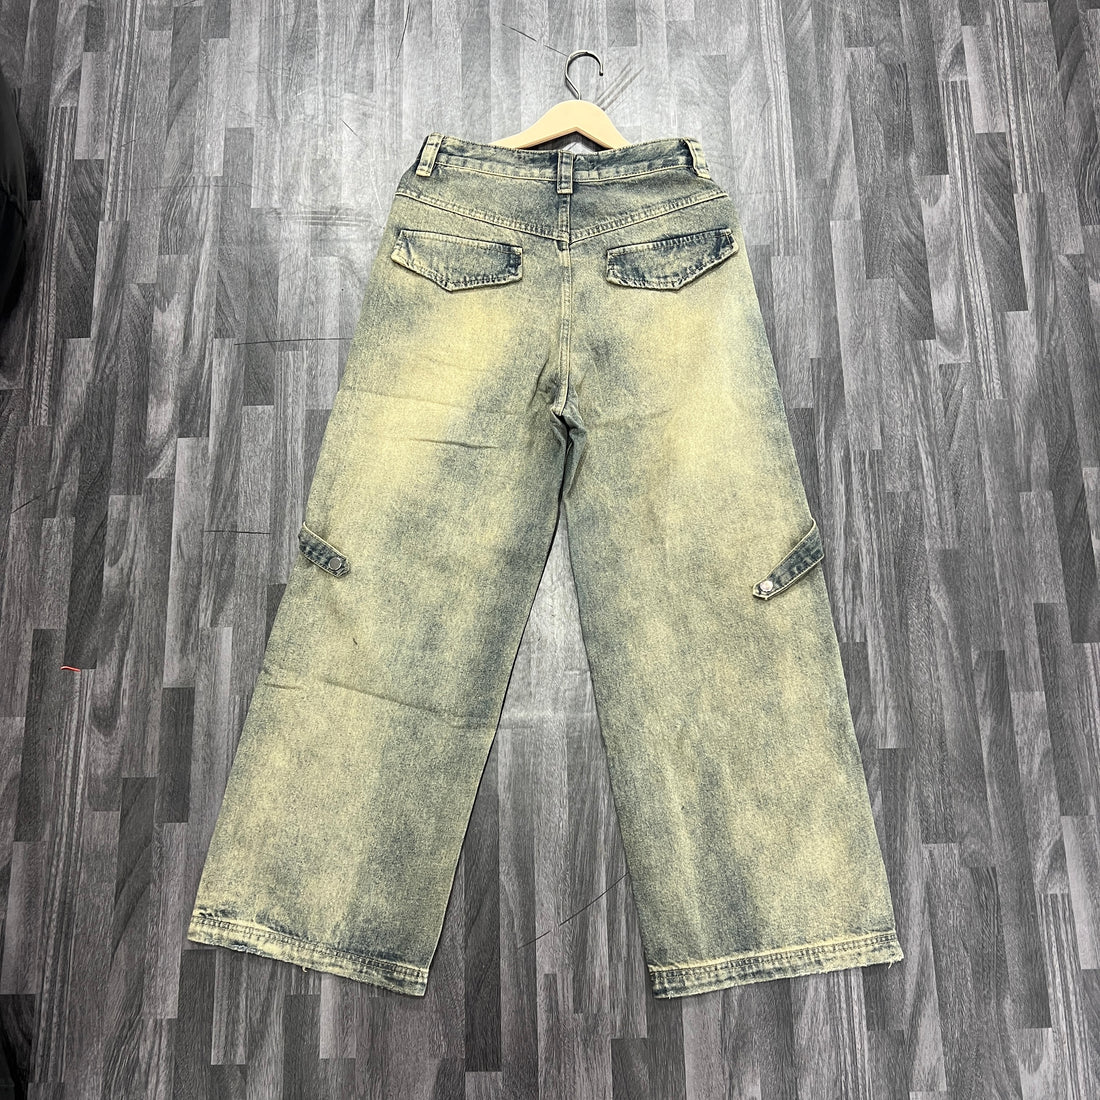 First sample cargo pants